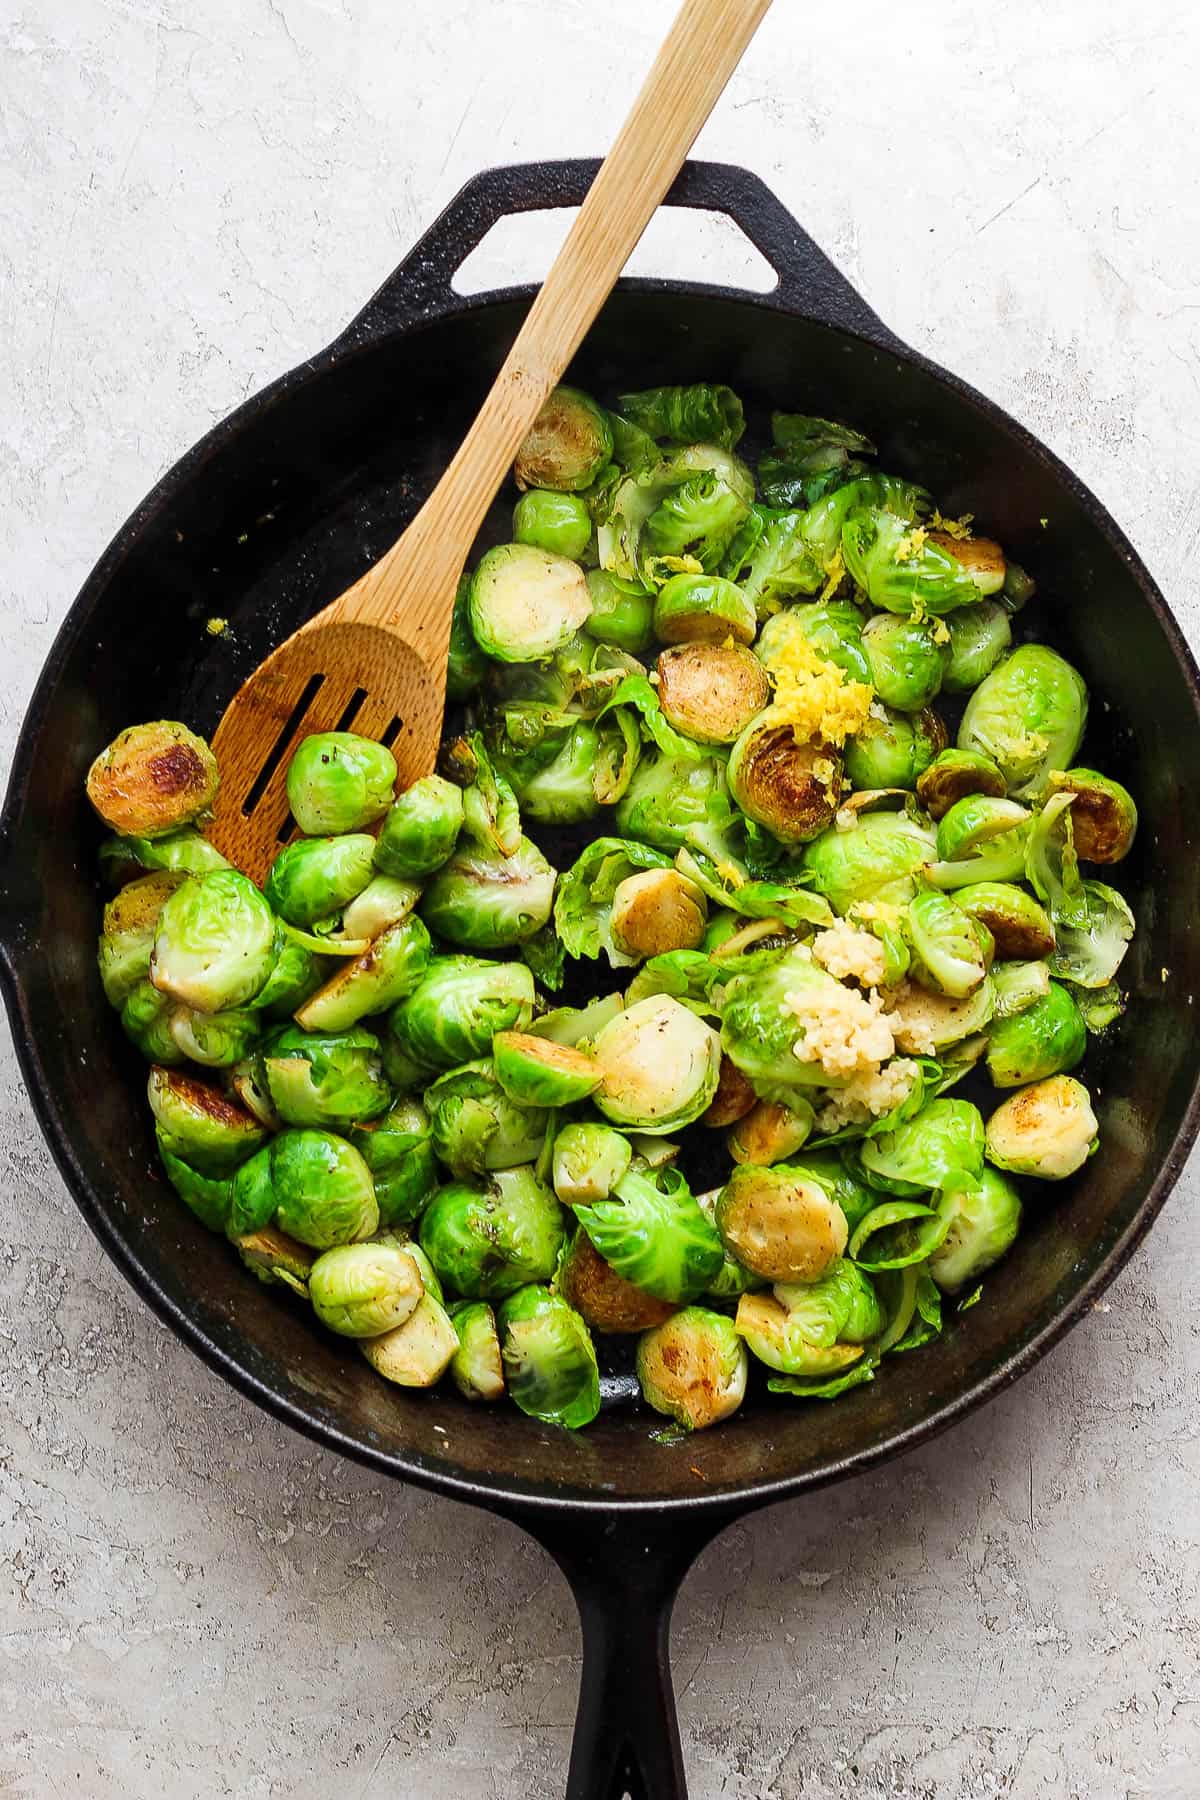 cooked brussel sprouts plus lemon zest and minced garlic in the cast iron skillet.